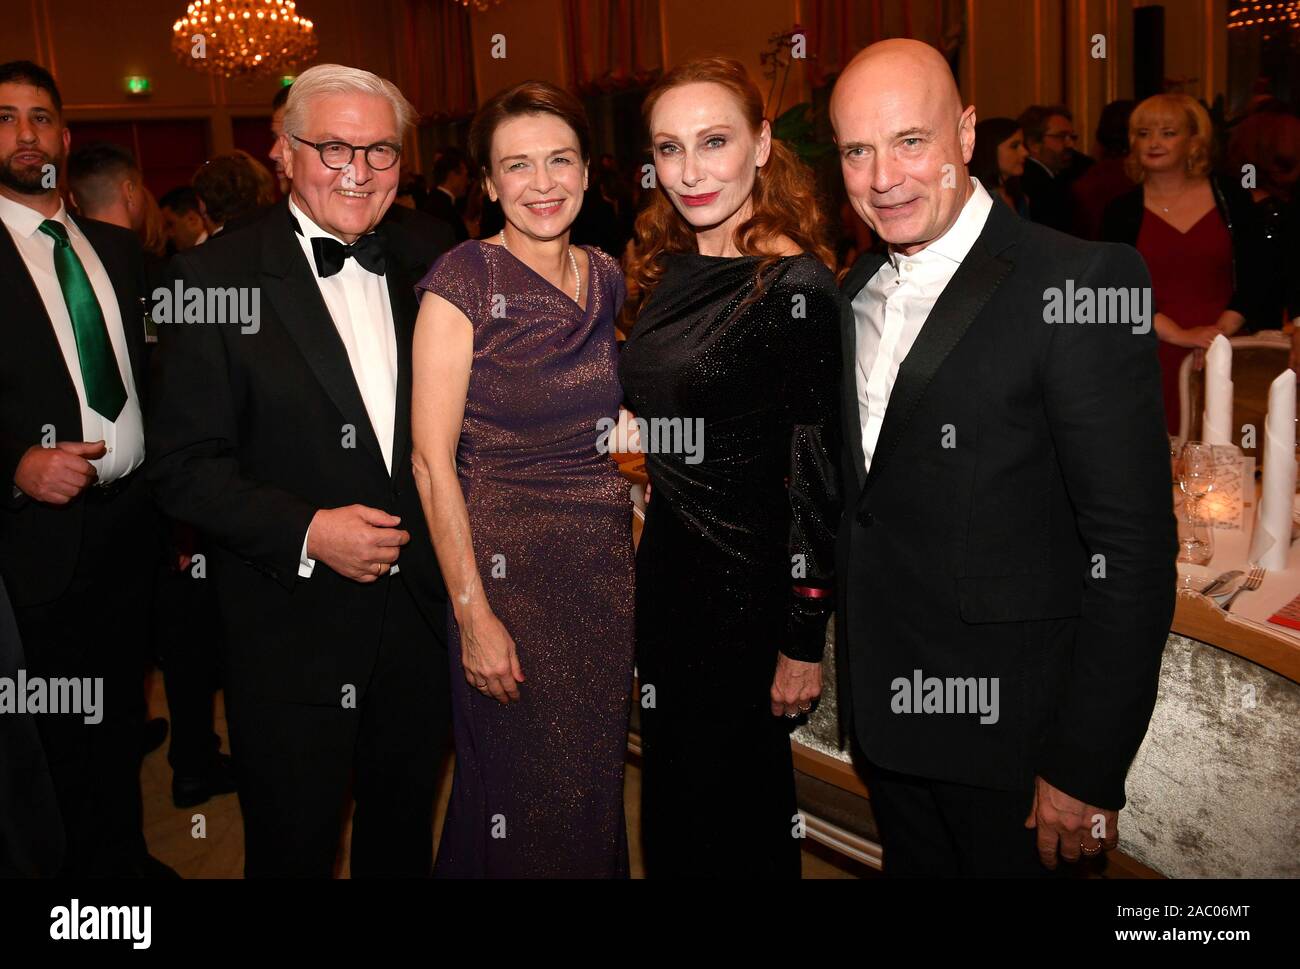 Berlin, Germany. 29th Nov, 2019. Federal President Frank-Walter Steinmeier and his wife Elke Büdenbender are standing next to actress Andrea Sawatzki (2nd from right) and her husband actor Christian Berkel (right) at the 68th Federal Press Ball under the motto "Change" at the Hotel Adlon. Credit: Jens Kalaene/dpa-Zentralbild/POOL/dpa/Alamy Live News Stock Photo